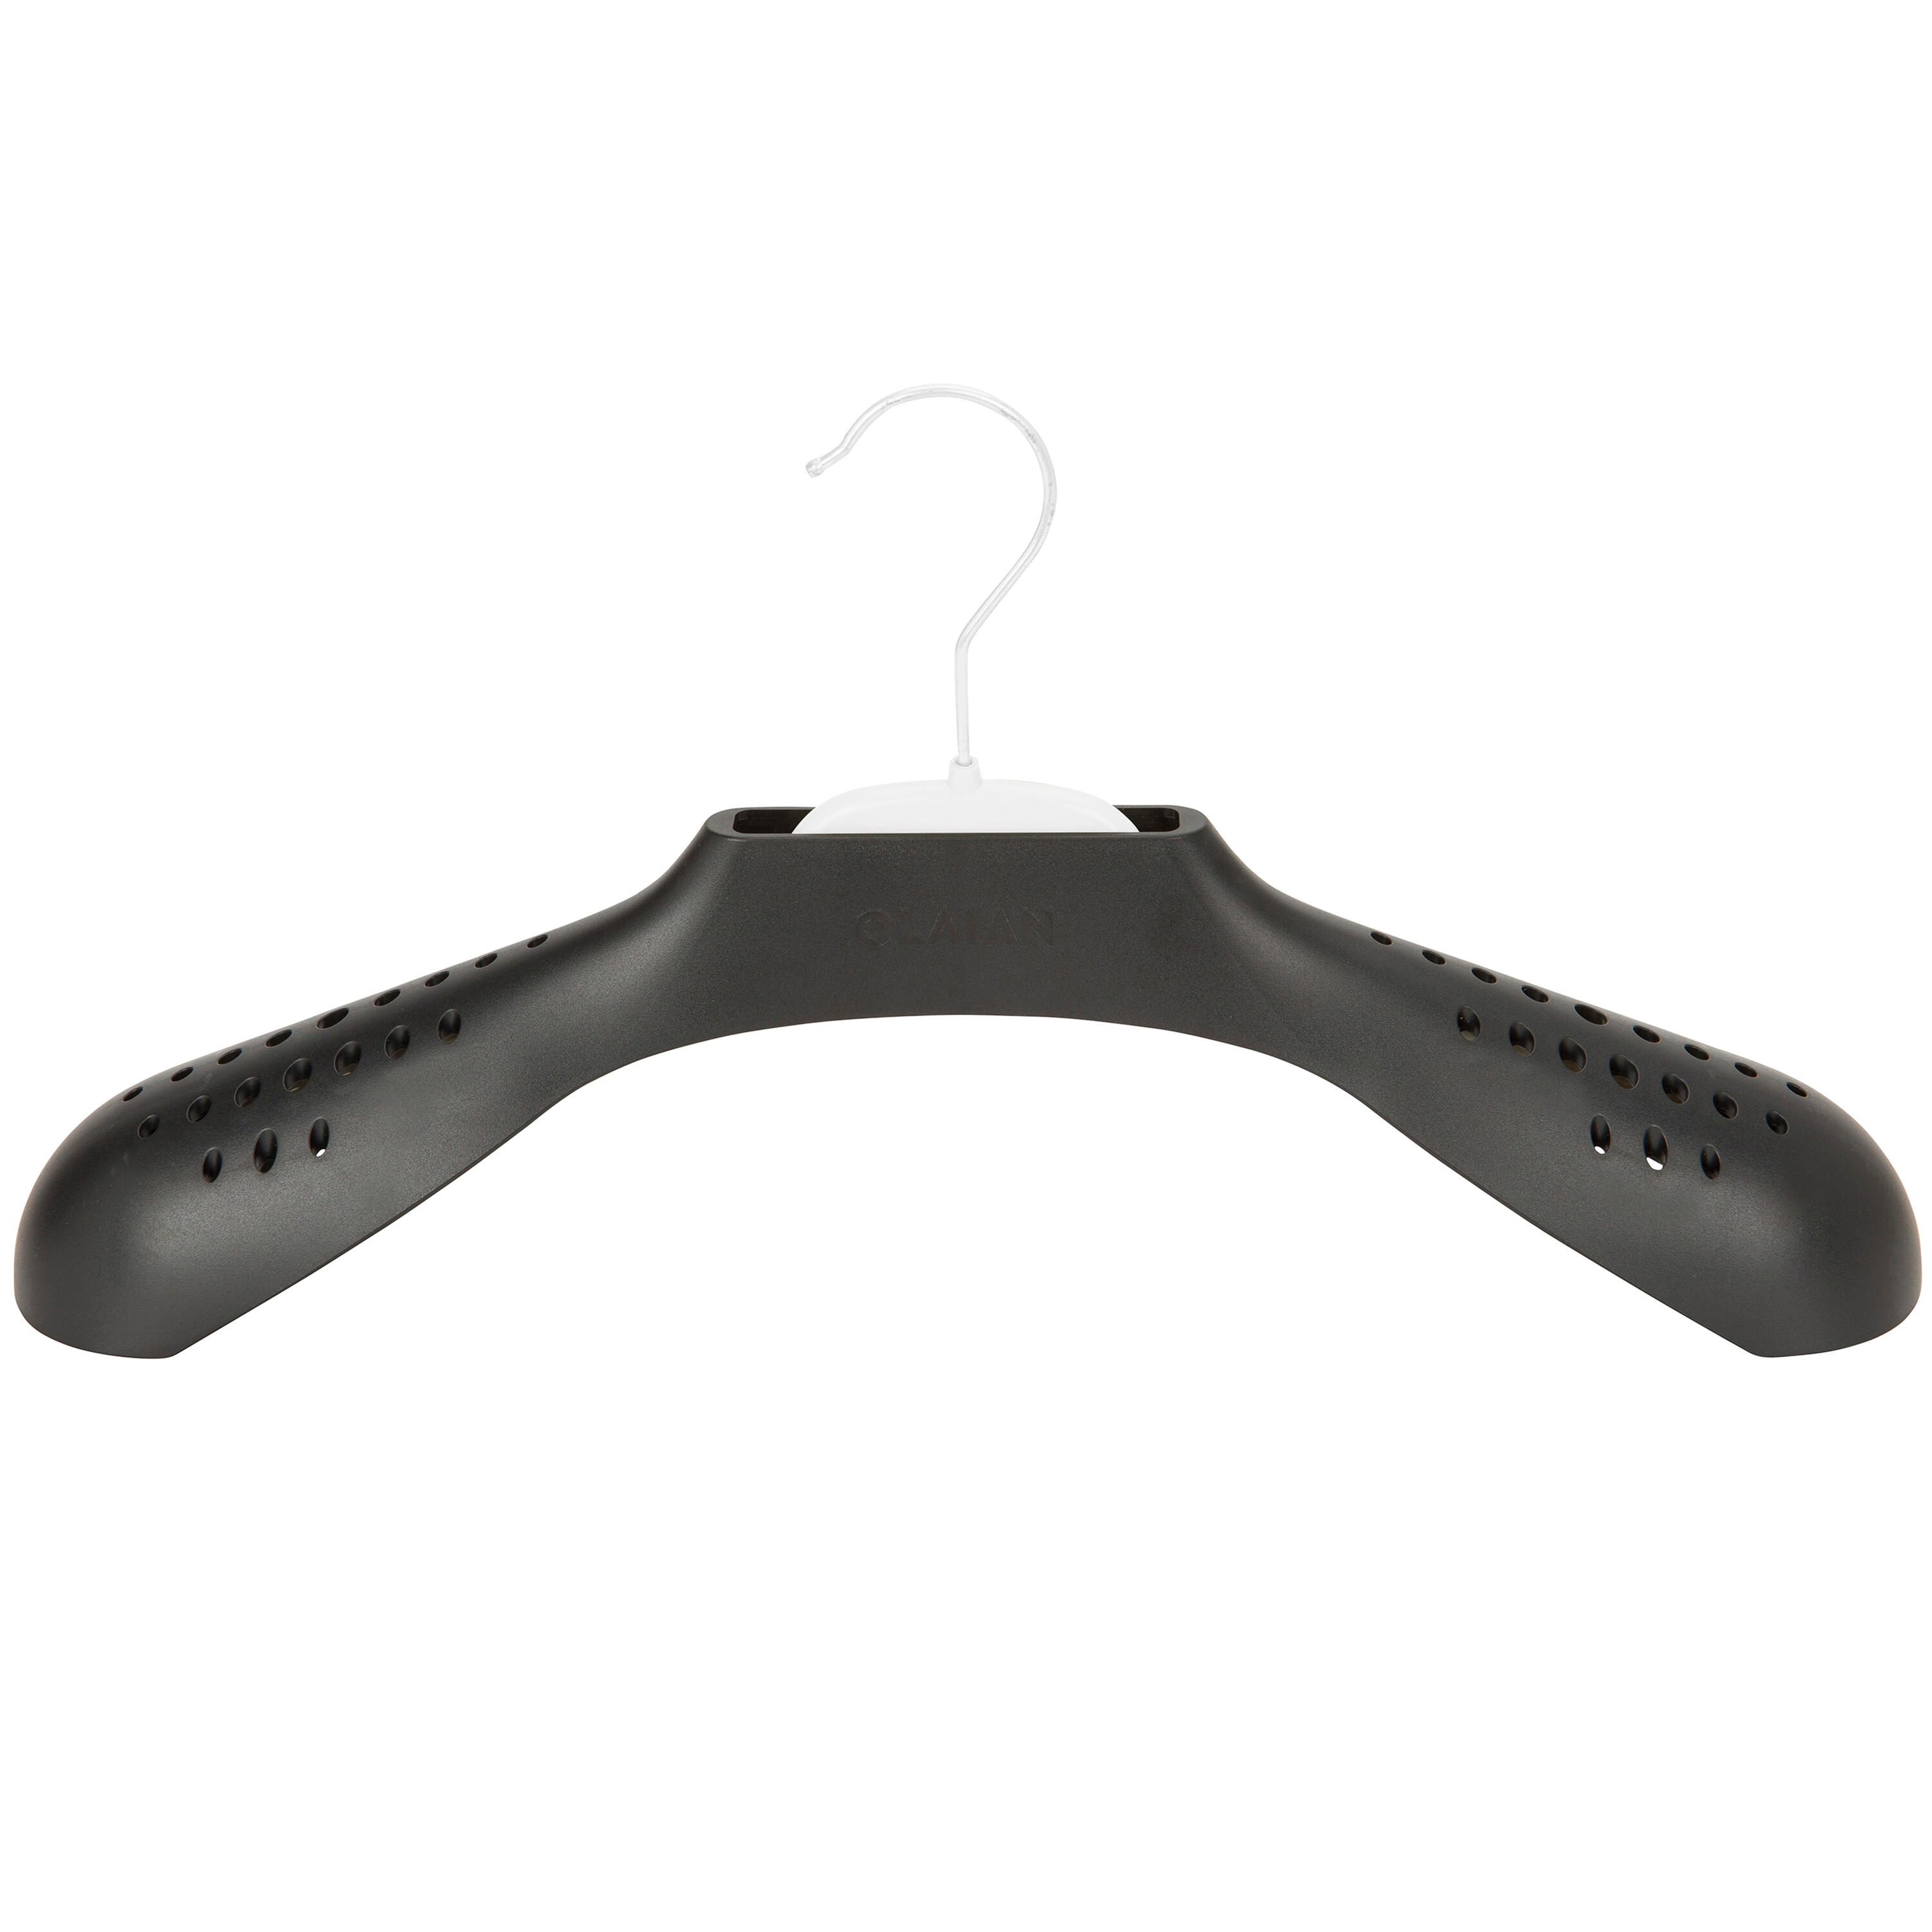 Surfing wetsuit hanger - OLAIAN